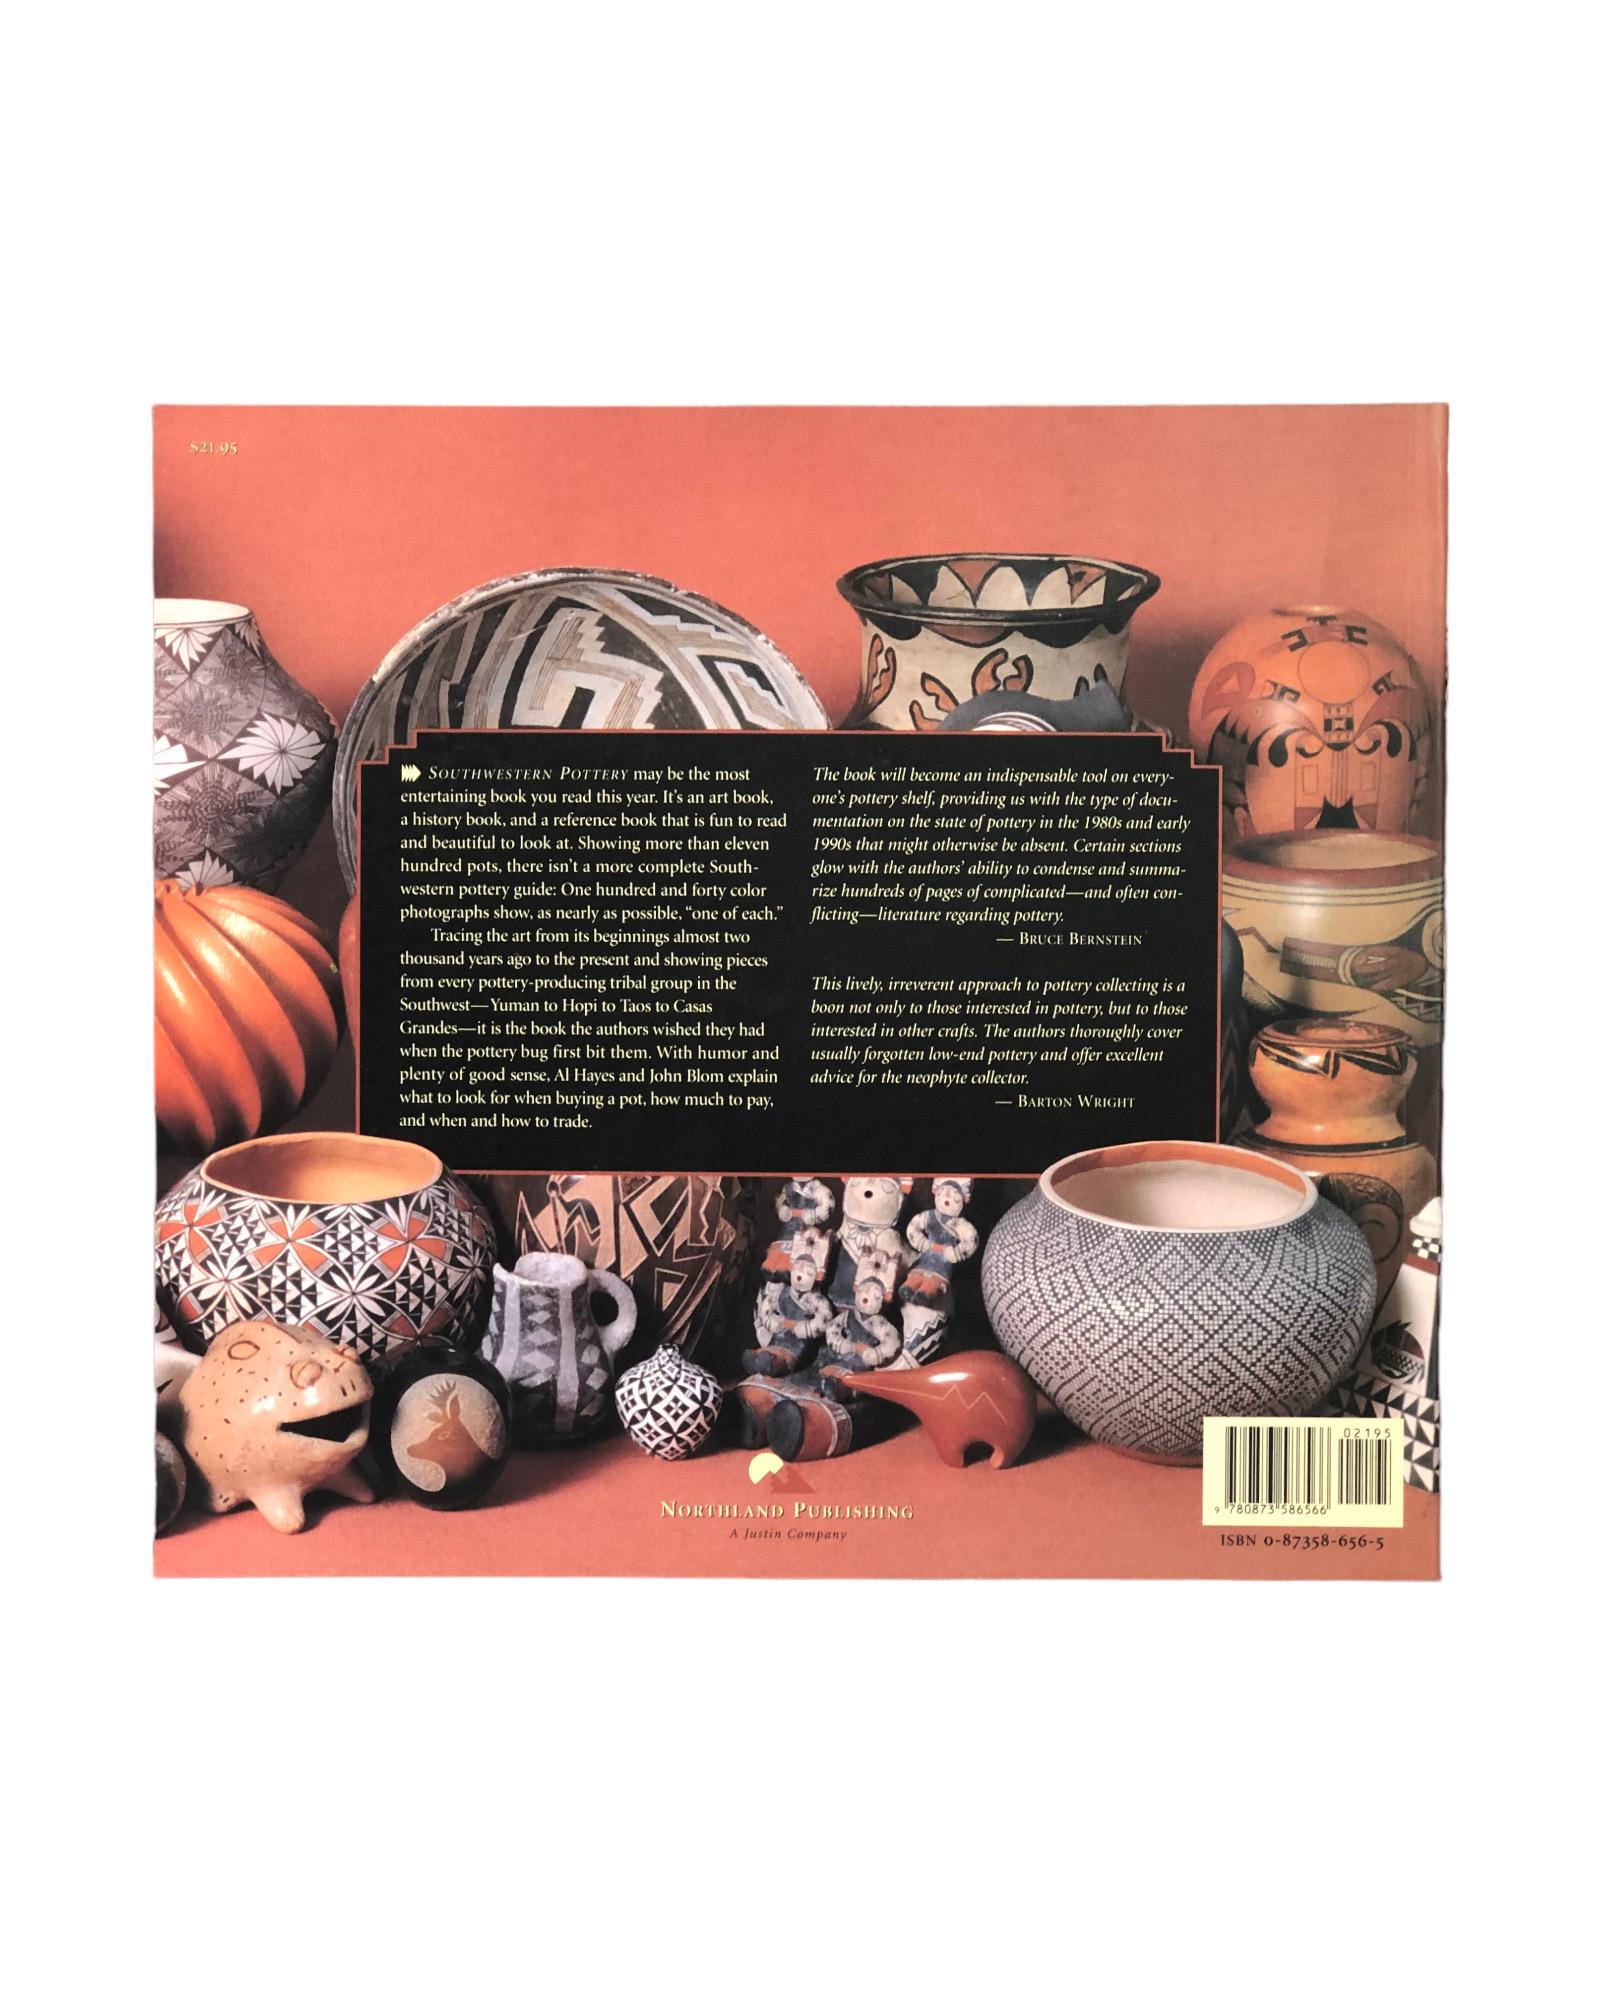 Southwestern Pottery - Anasazi to Zuni by Allan Hayes and John Blom. Softcover book, published in 1997 by Northland Publishing. Manufactured in Hong Kong, illustrated, 189 pages.
